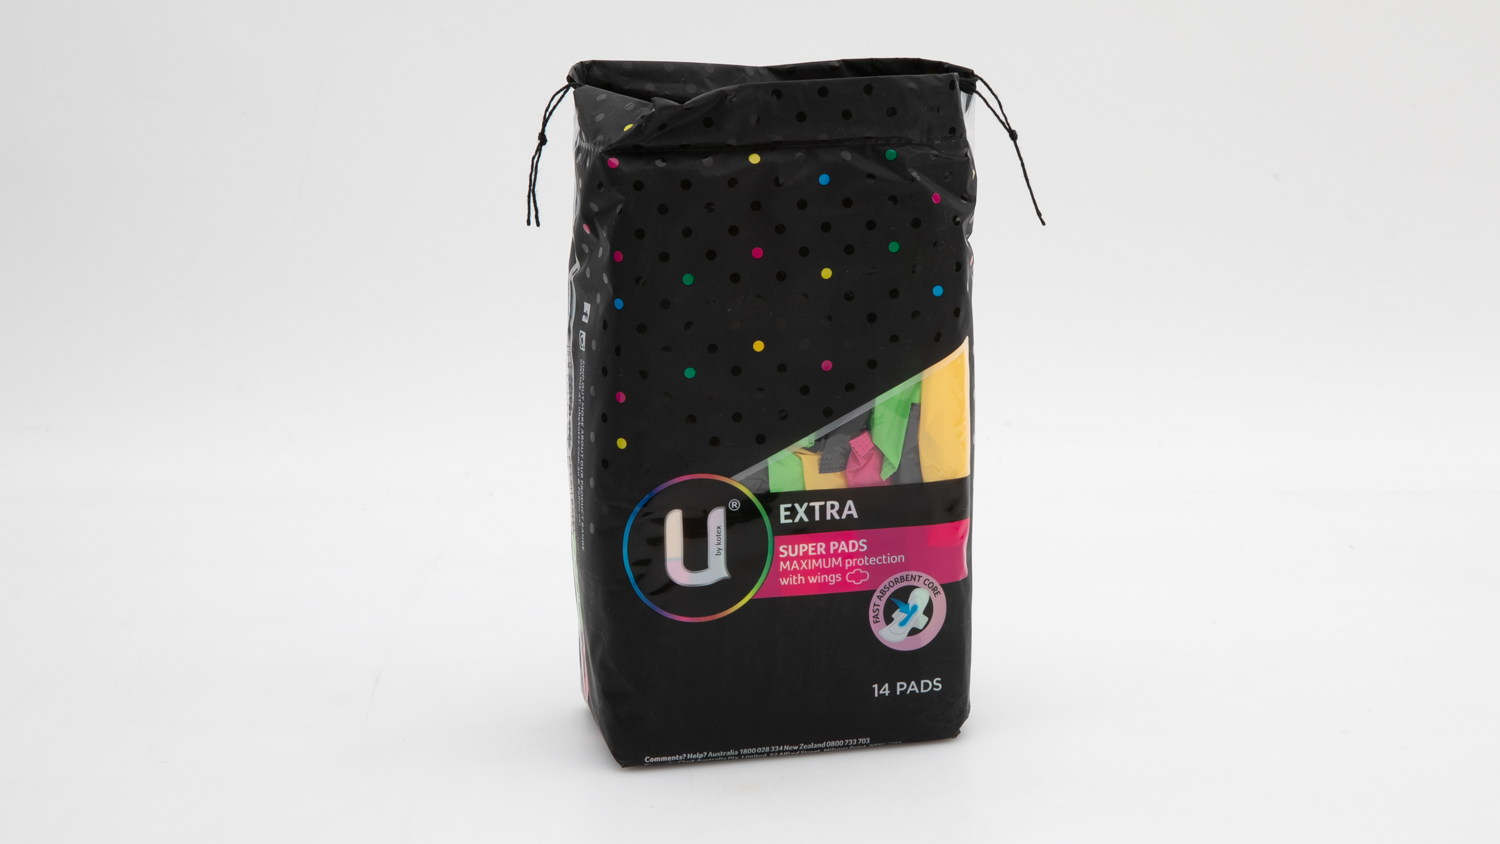 U by Kotex Extra Super Pads with wings carousel image